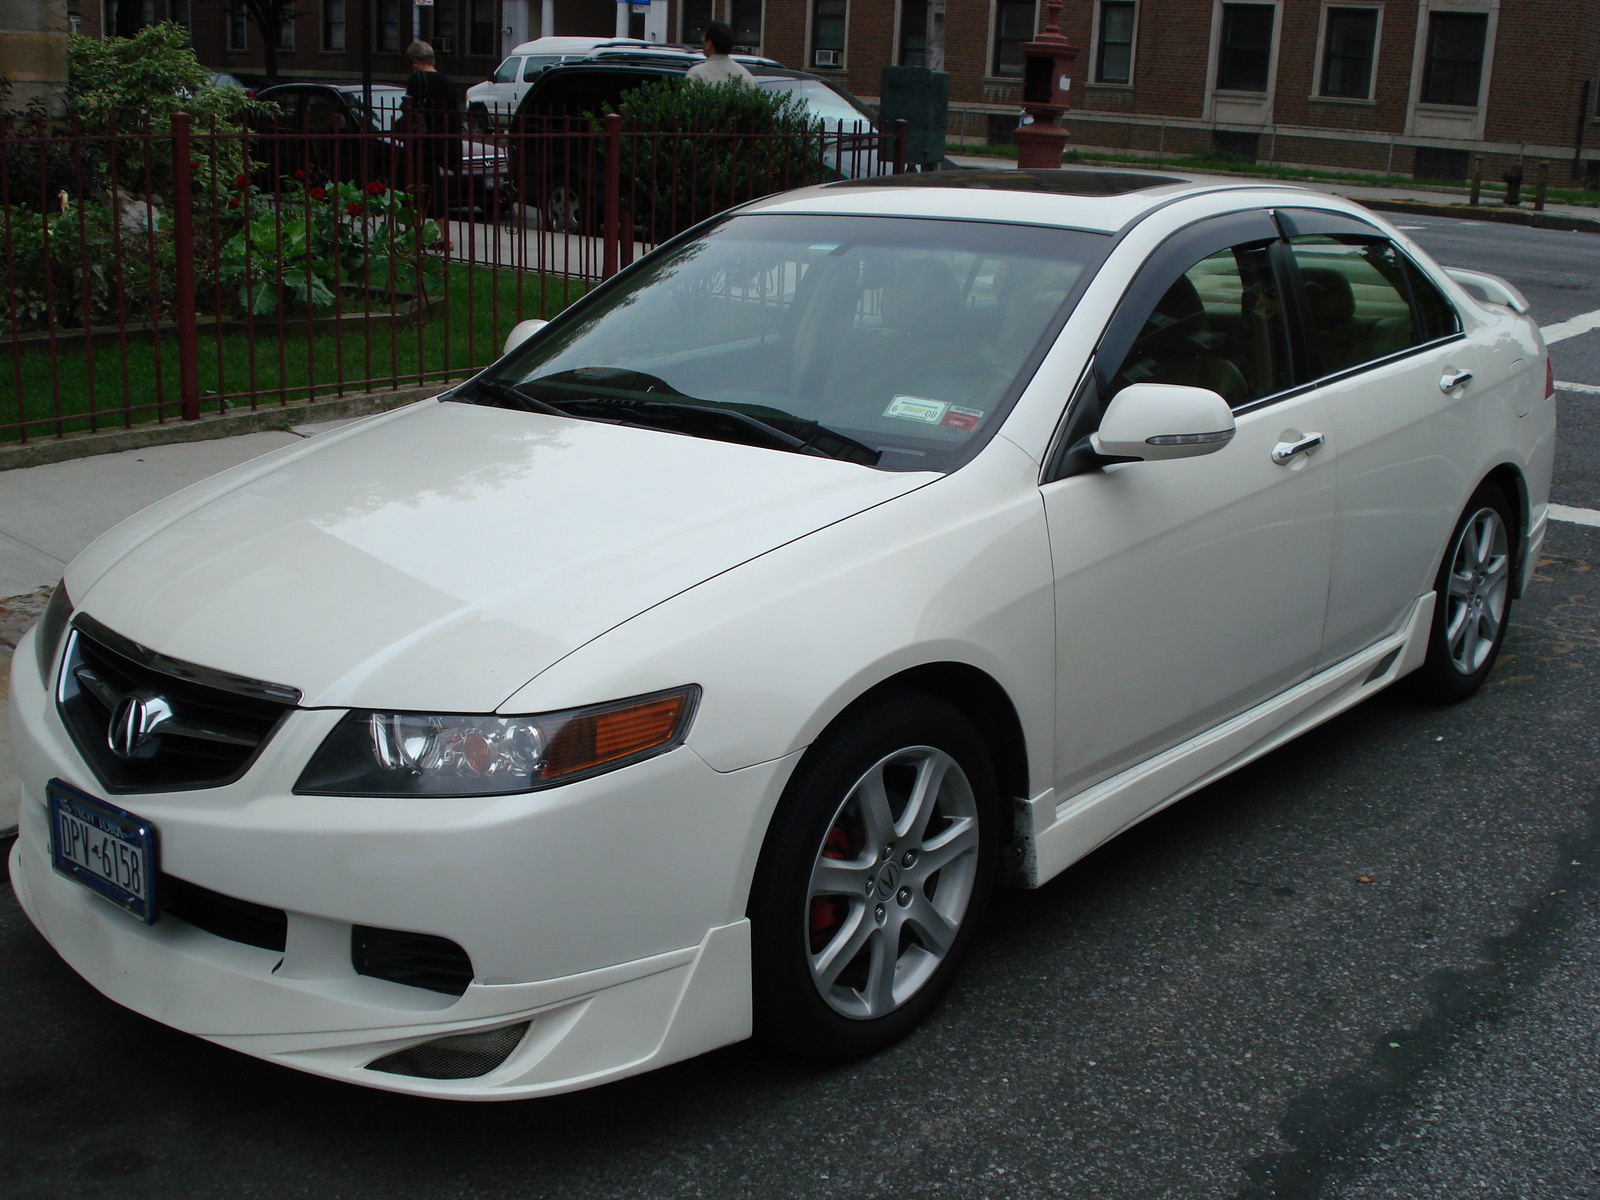 Acura TSX Backgrounds, Compatible - PC, Mobile, Gadgets| 1600x1200 px